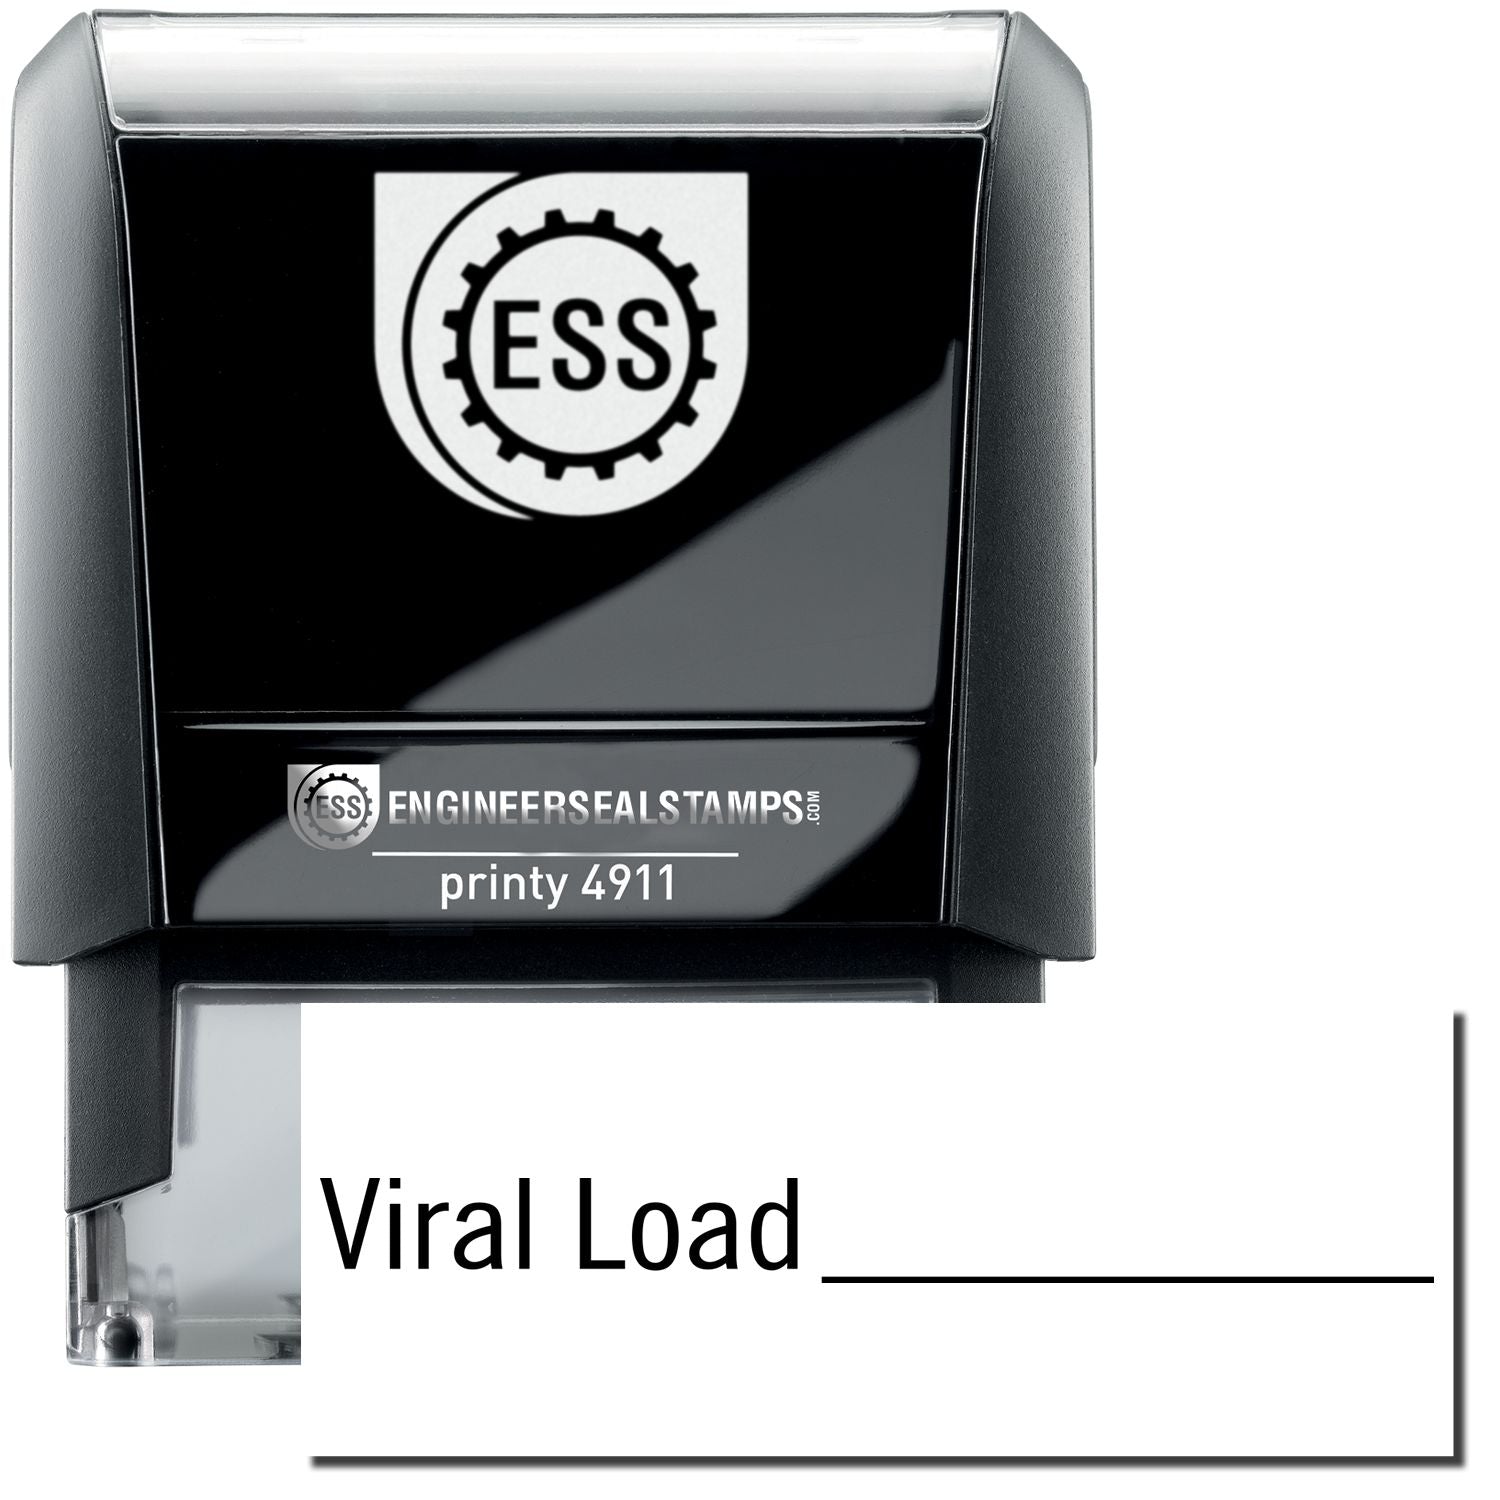 A self-inking stamp with a stamped image showing how the text "Viral Load" with a line is displayed after stamping.